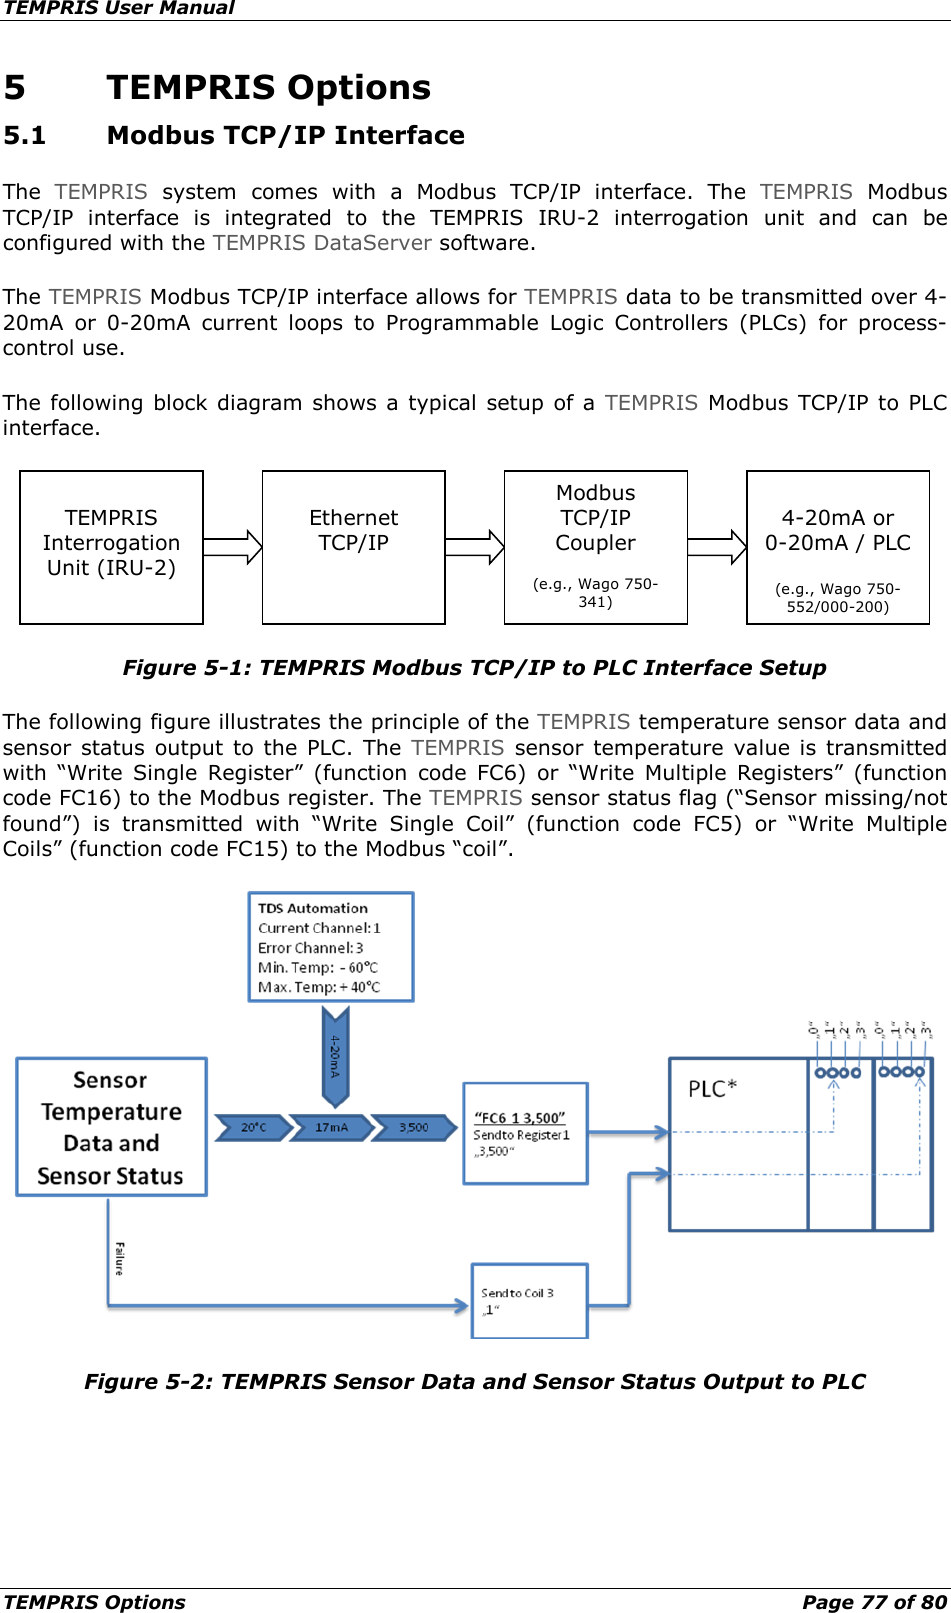 TEMPRIS User Manual TEMPRIS Options    Page 77 of 80 5 TEMPRIS Options 5.1 Modbus TCP/IP Interface The  TEMPRIS system comes with a Modbus TCP/IP interface. The TEMPRIS Modbus TCP/IP interface is integrated to the TEMPRIS IRU-2  interrogation unit and can be configured with the TEMPRIS DataServer software. The TEMPRIS Modbus TCP/IP interface allows for TEMPRIS data to be transmitted over 4-20mA or 0-20mA current loops to Programmable Logic Controllers (PLCs) for process-control use. The following block diagram shows a typical setup of a TEMPRIS Modbus TCP/IP to PLC interface.  Figure 5-1: TEMPRIS Modbus TCP/IP to PLC Interface Setup The following figure illustrates the principle of the TEMPRIS temperature sensor data and sensor status output to the PLC. The TEMPRIS sensor temperature value is transmitted with “Write Single Register” (function code FC6) or “Write Multiple Registers” (function code FC16) to the Modbus register. The TEMPRIS sensor status flag (“Sensor missing/not found”) is transmitted with “Write Single Coil” (function code FC5) or “Write Multiple Coils” (function code FC15) to the Modbus “coil”.  Figure 5-2: TEMPRIS Sensor Data and Sensor Status Output to PLC   TEMPRIS Interrogation Unit (IRU-2)  Ethernet TCP/IP Modbus TCP/IP Coupler  (e.g., Wago 750-341)  4-20mA or 0-20mA / PLC  (e.g., Wago 750-552/000-200) 